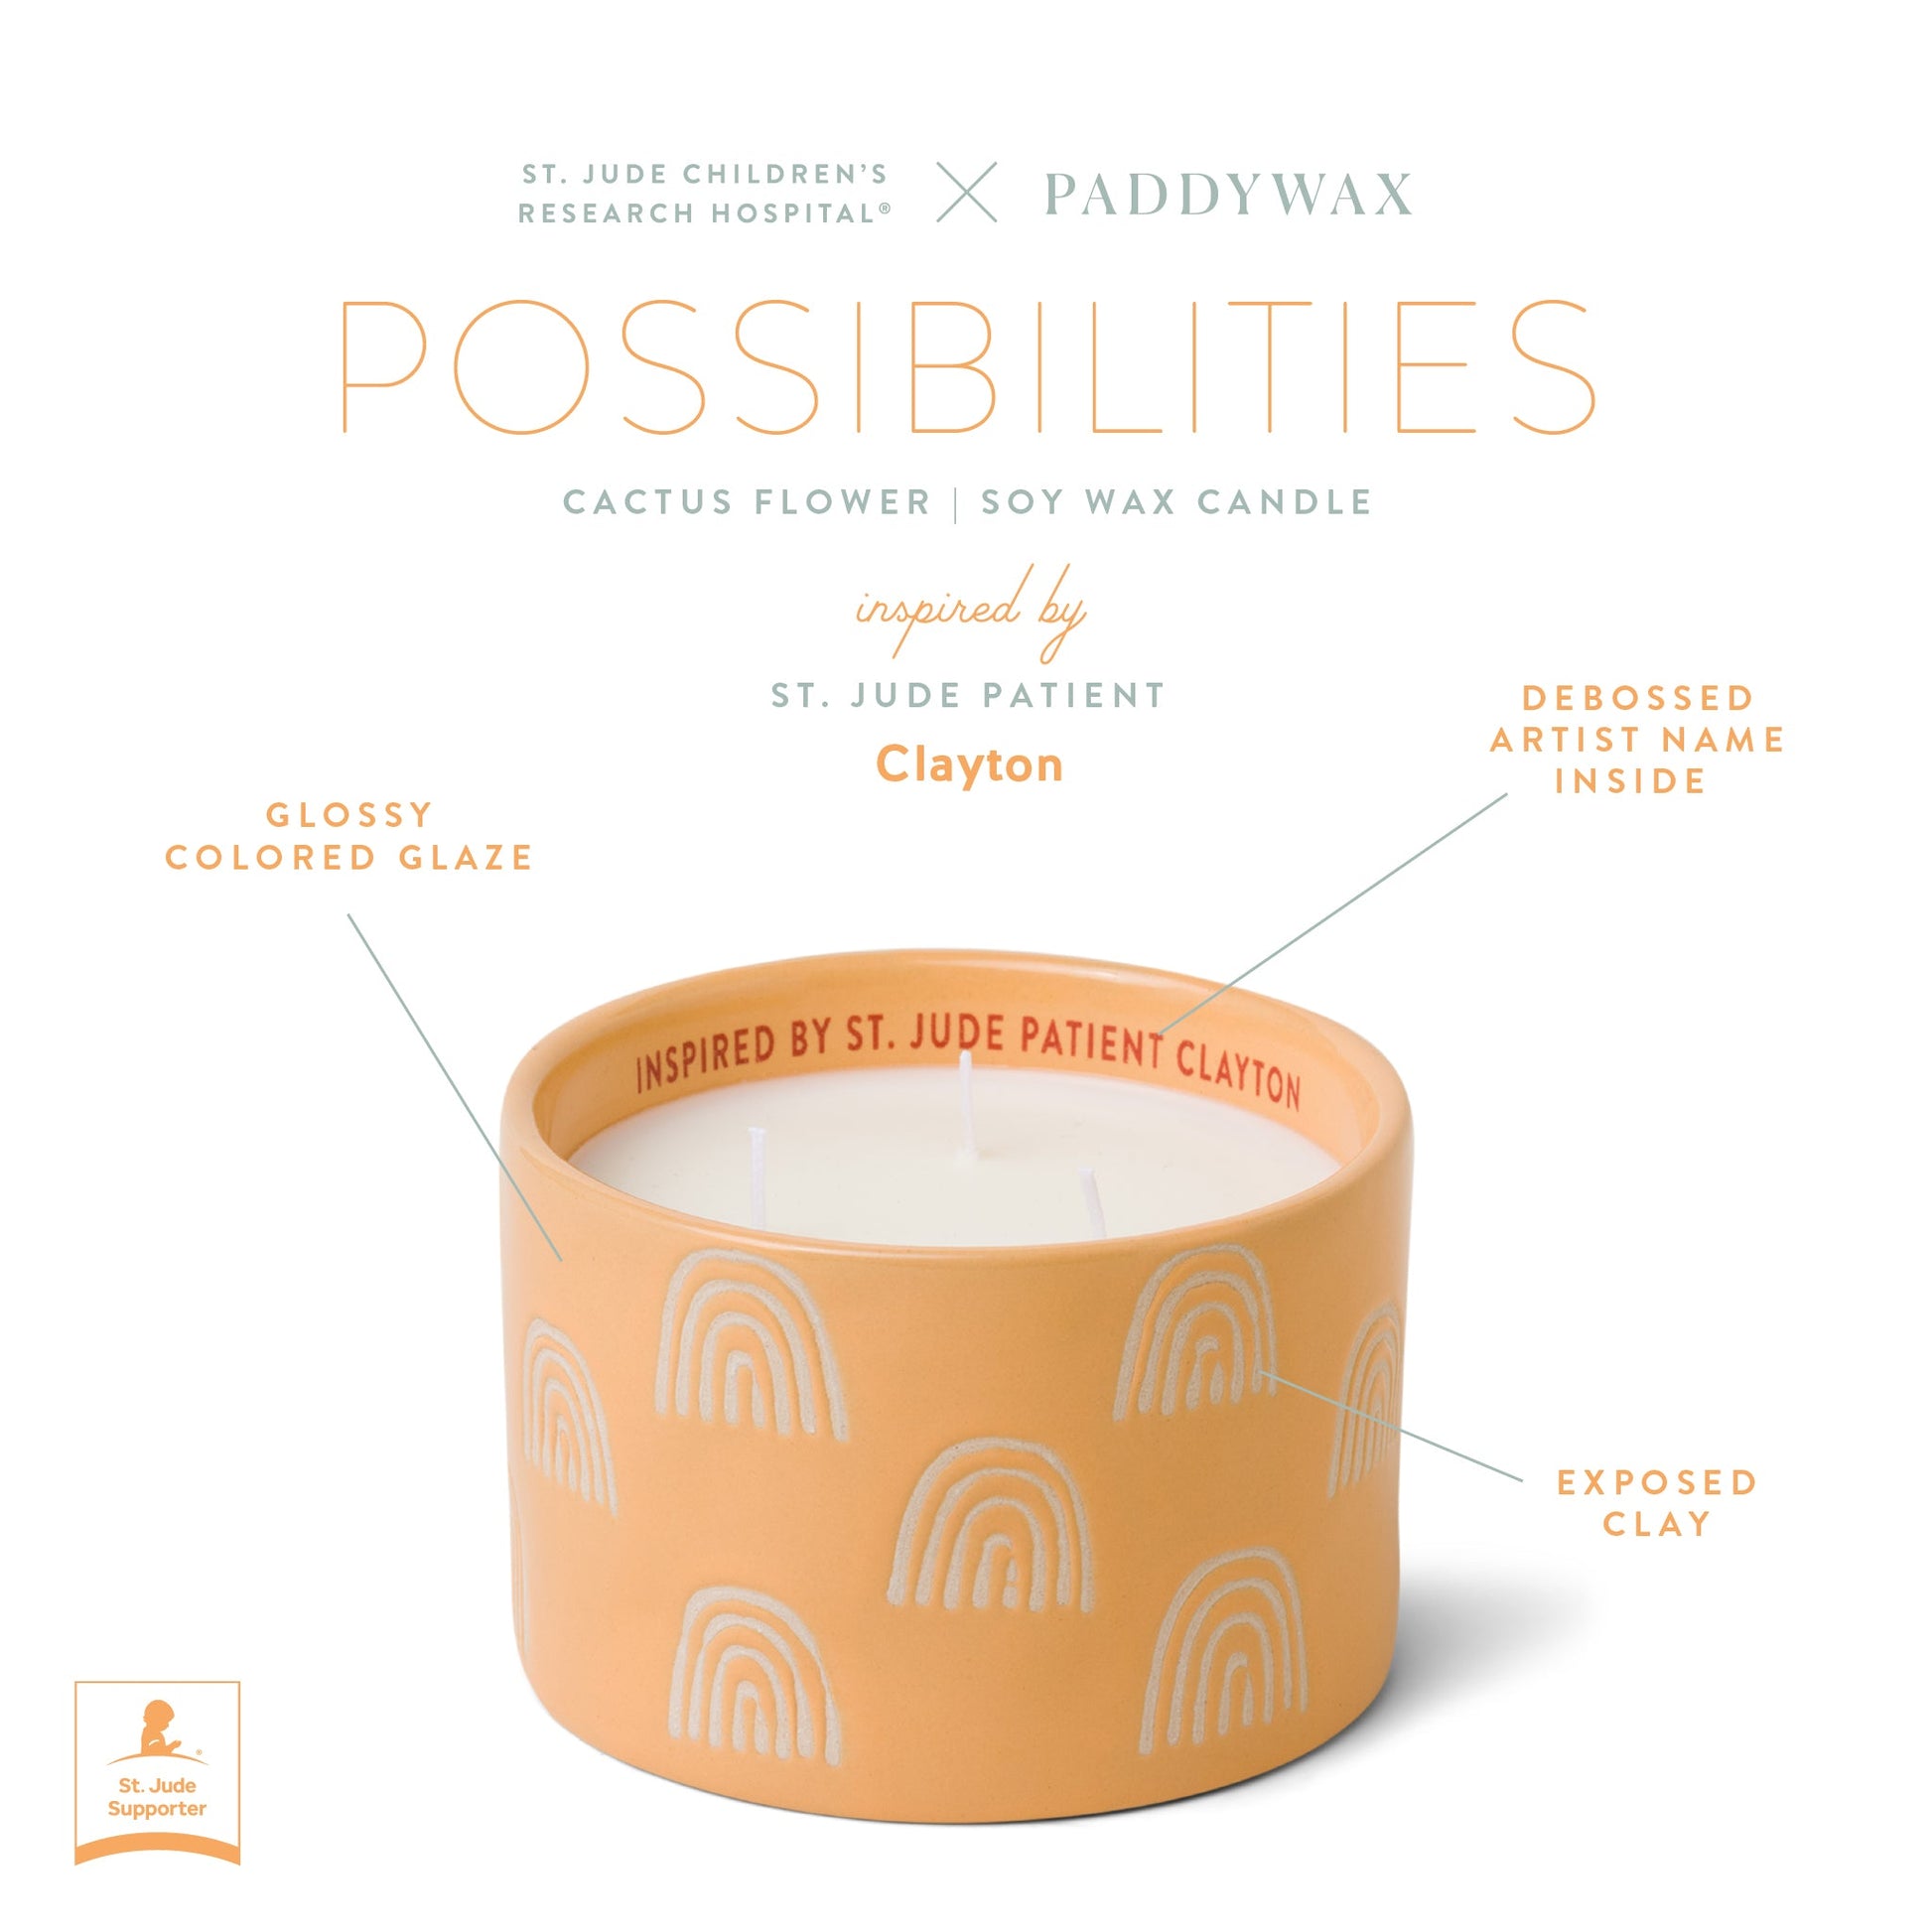 Infographic of yellow ceramic candle with product features text "St. Jude Children's Research Hospital ® x Paddywax Possibilities Cactus Flower Soy Wax Candle inspired by St. Jude Patient Clayton. Glossy colored glazed. Debossed artist name inside. Exposed clay."